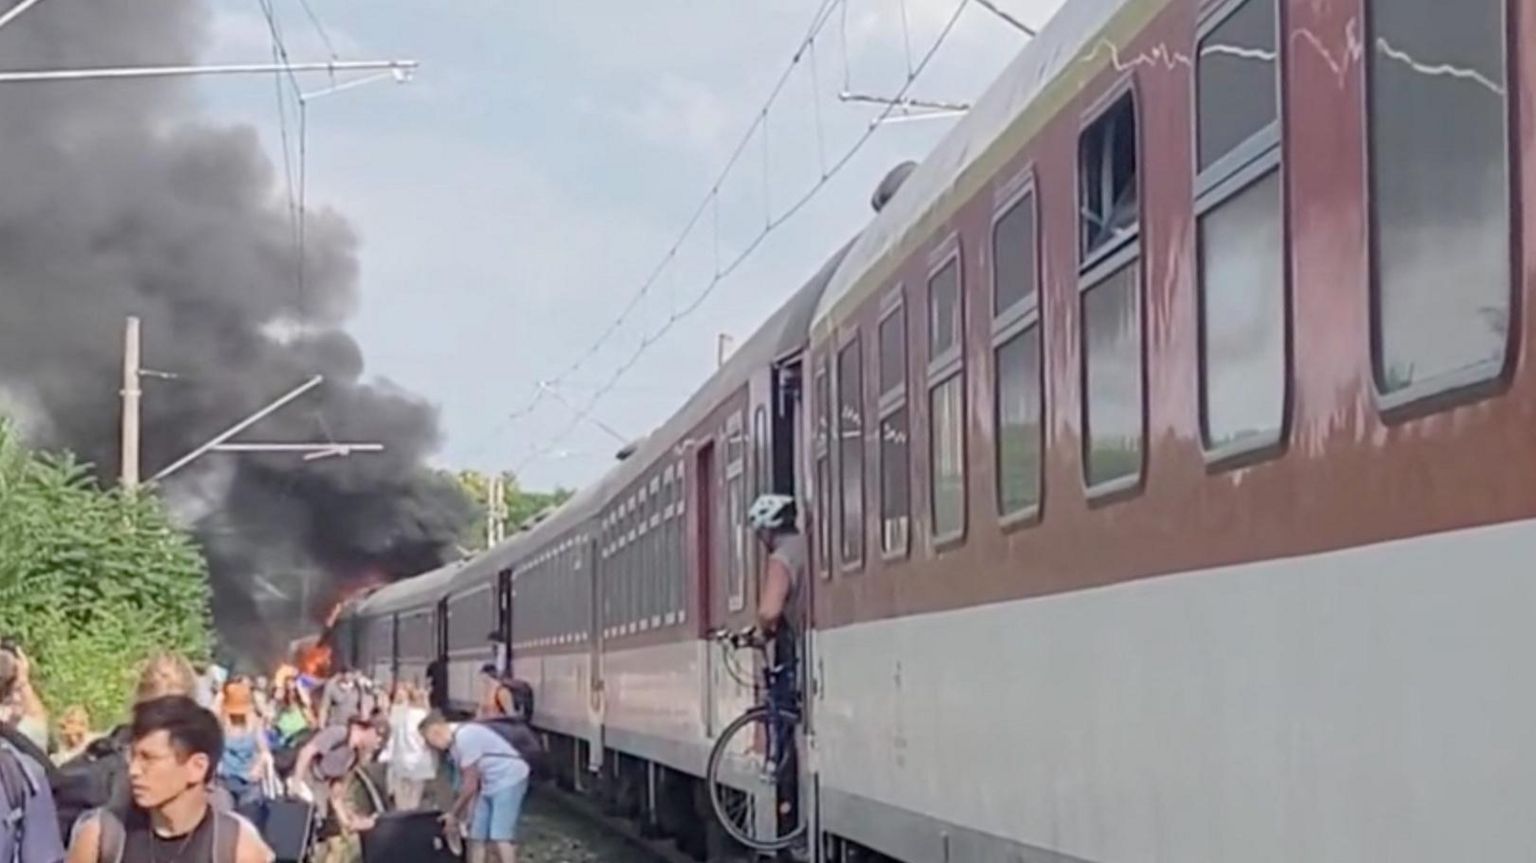 Passengers walk away from a train that is on fire at one end, with one man leaving the train with his bicycle.